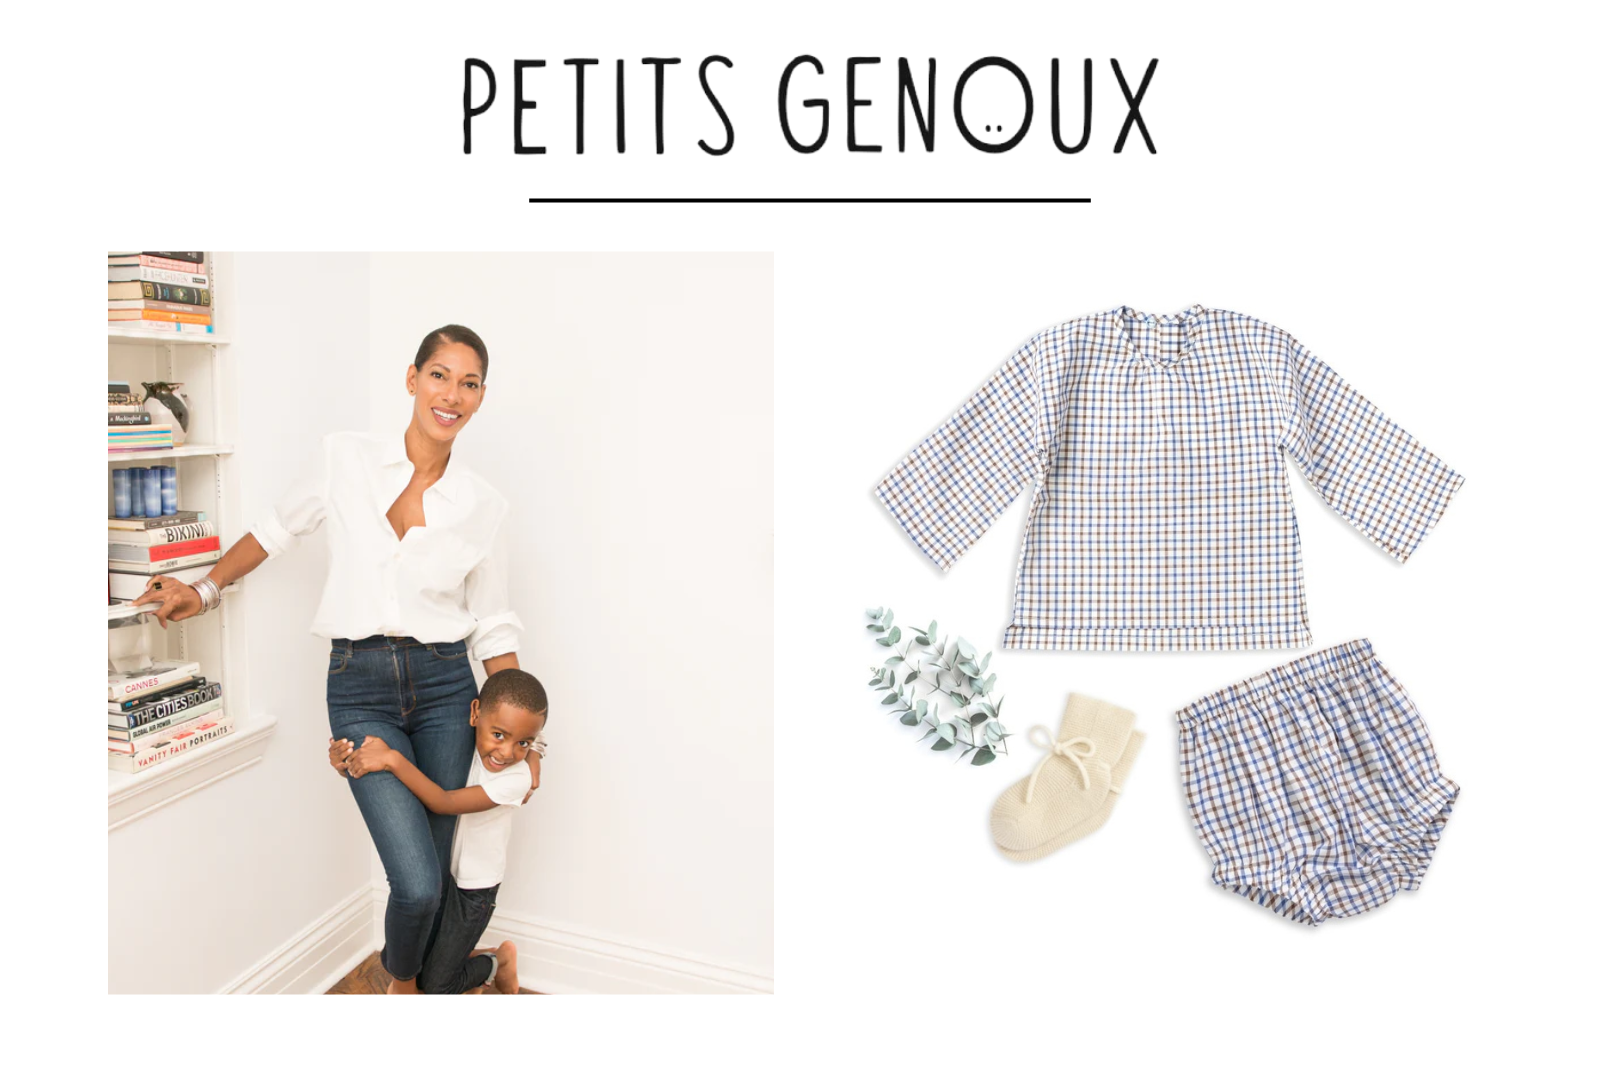 Kendra Francis founder and CEO of Petits Genoux thoughtfully crafted baby clothing